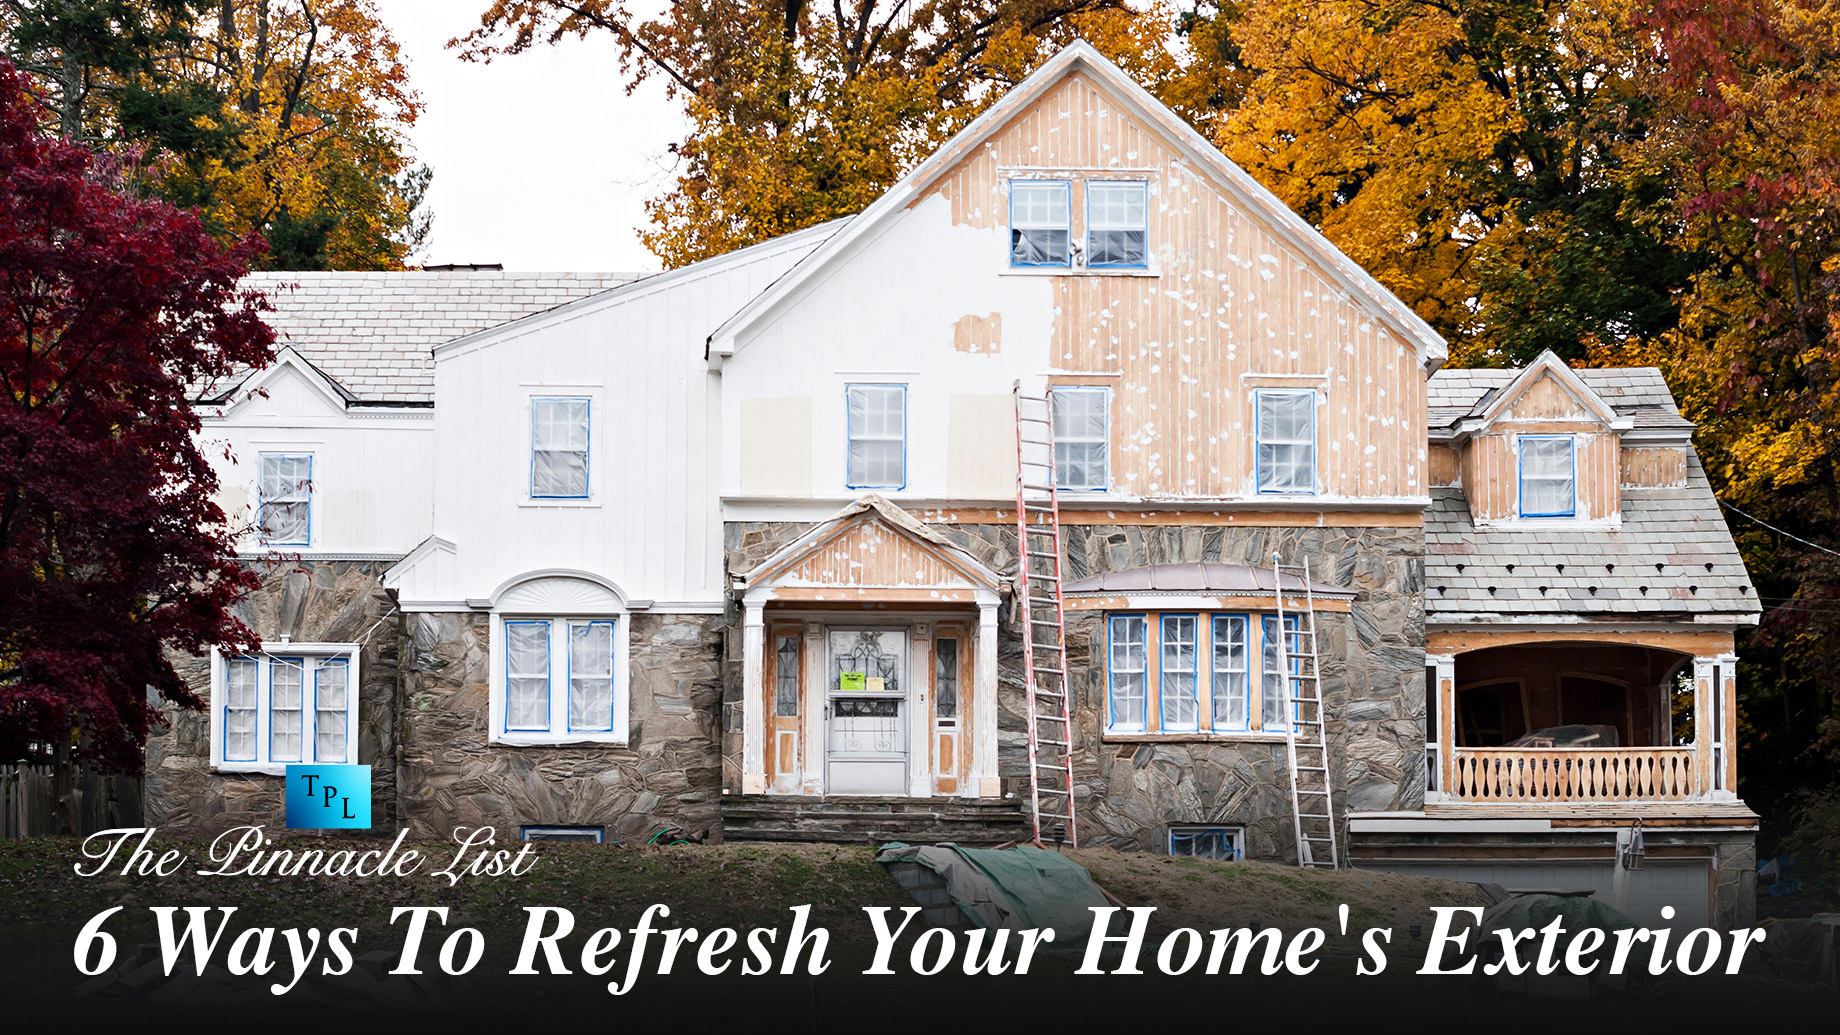 6 Ways To Refresh Your Home's Exterior